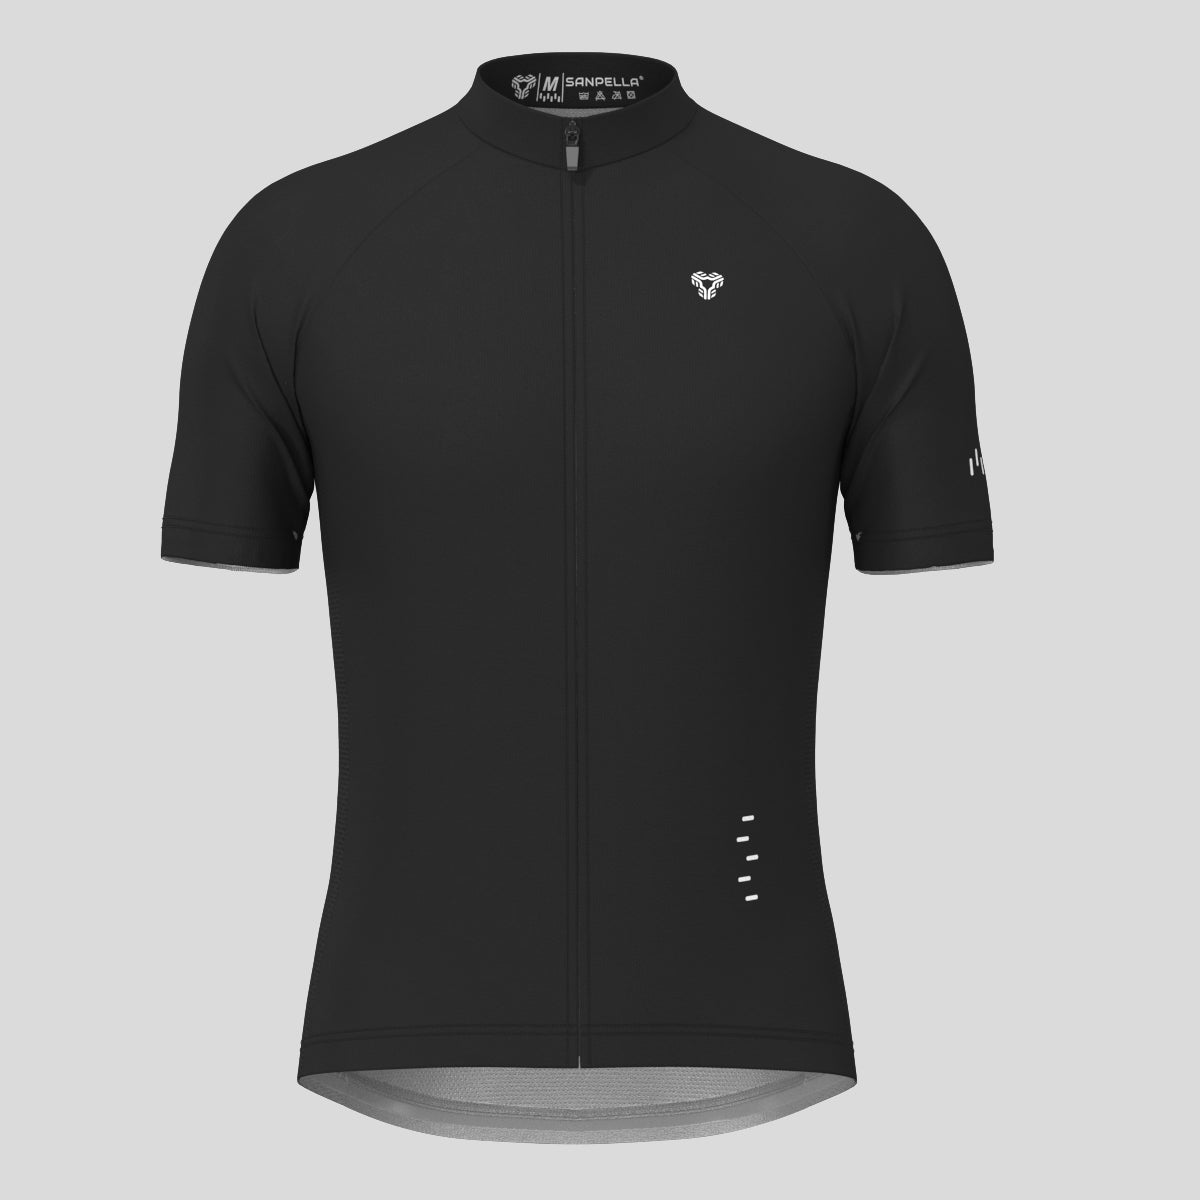 Men's Minimal Solid Cycling Jersey - Black